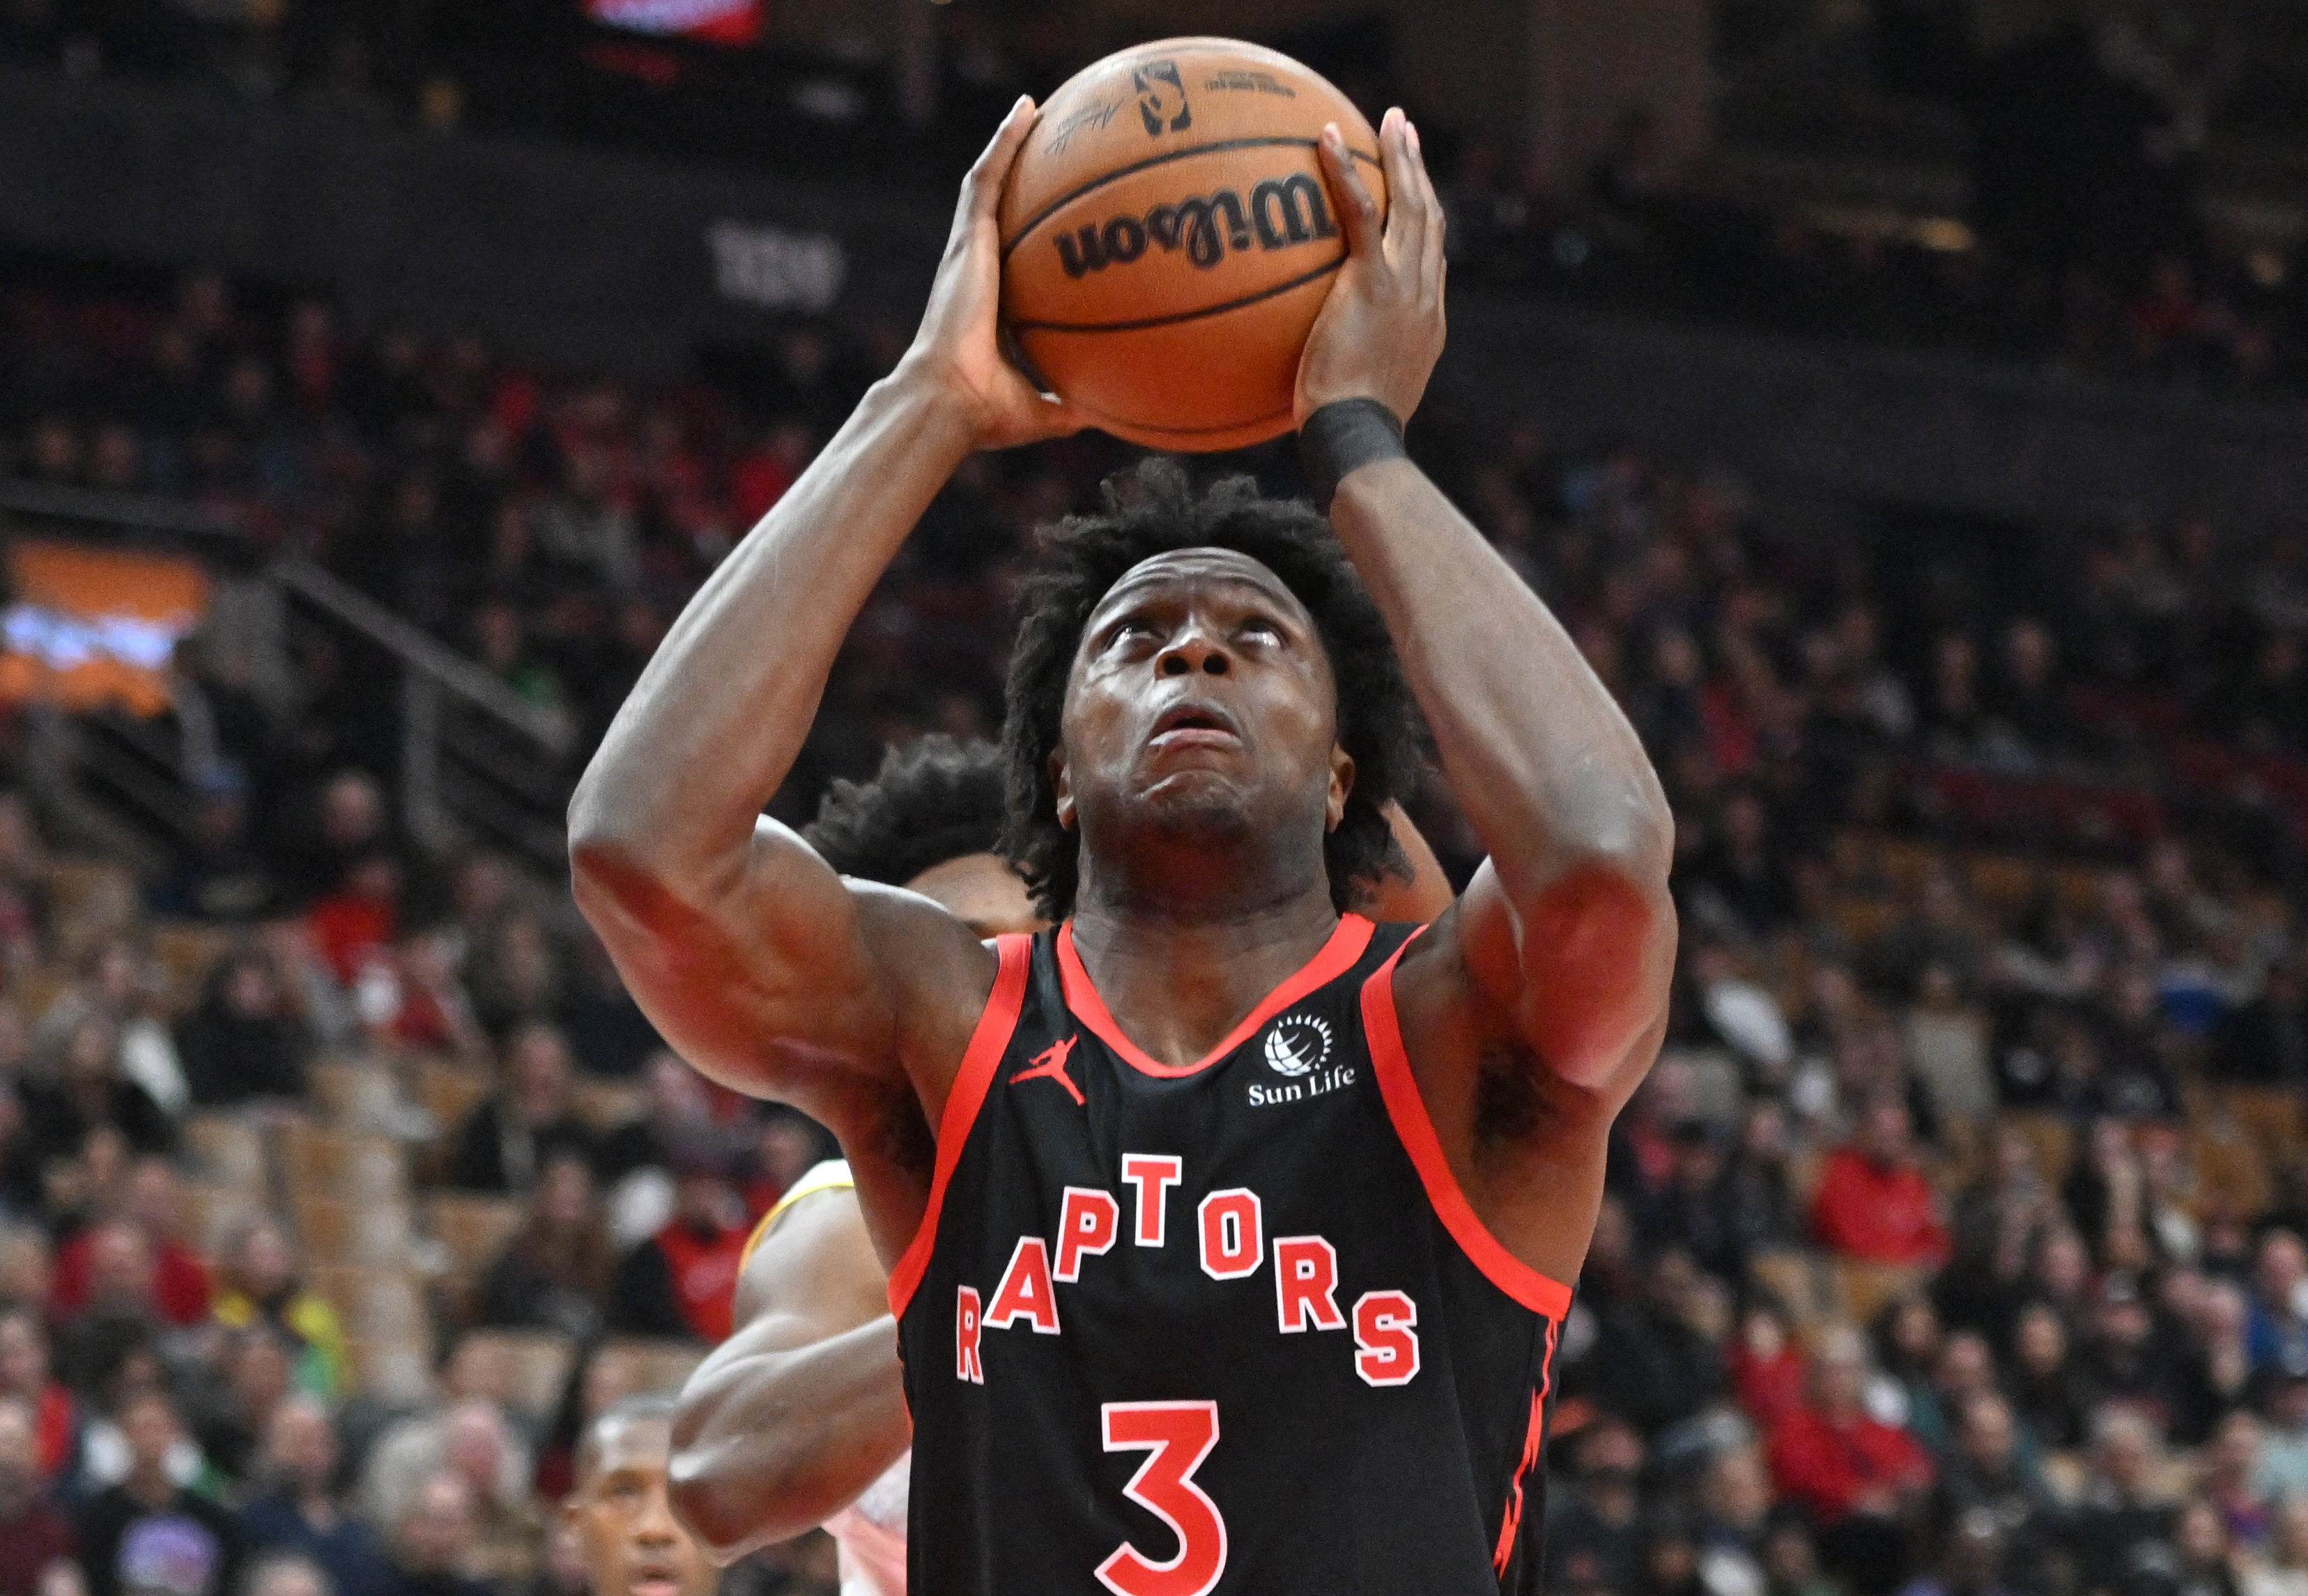 Toronto Raptors Temperature: OG Anunoby still searching for his